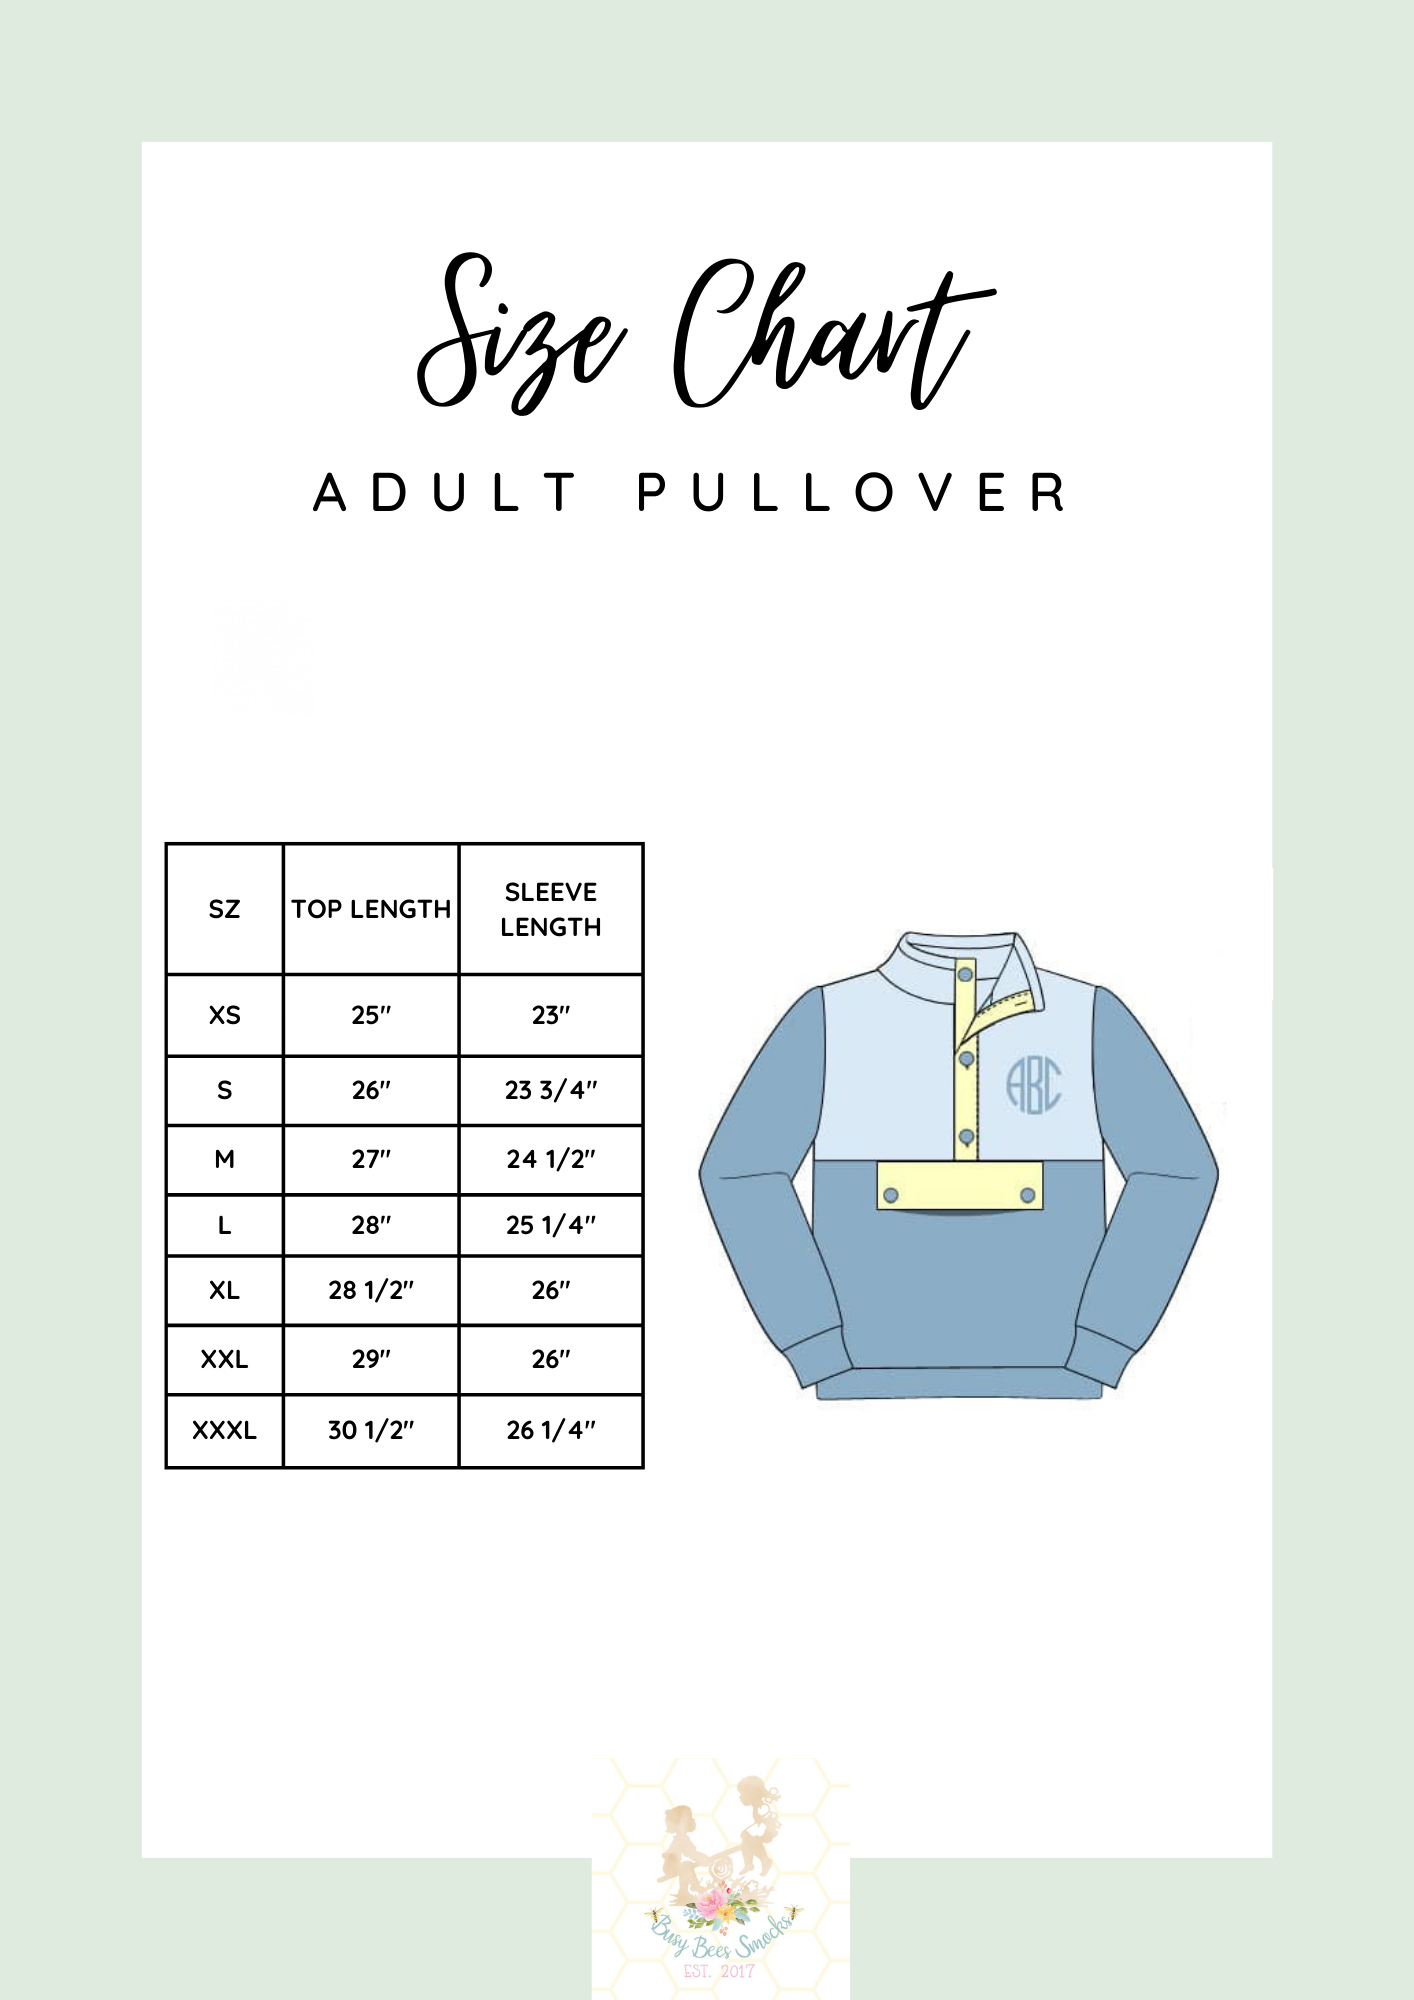 Adult Pullover Size Chart